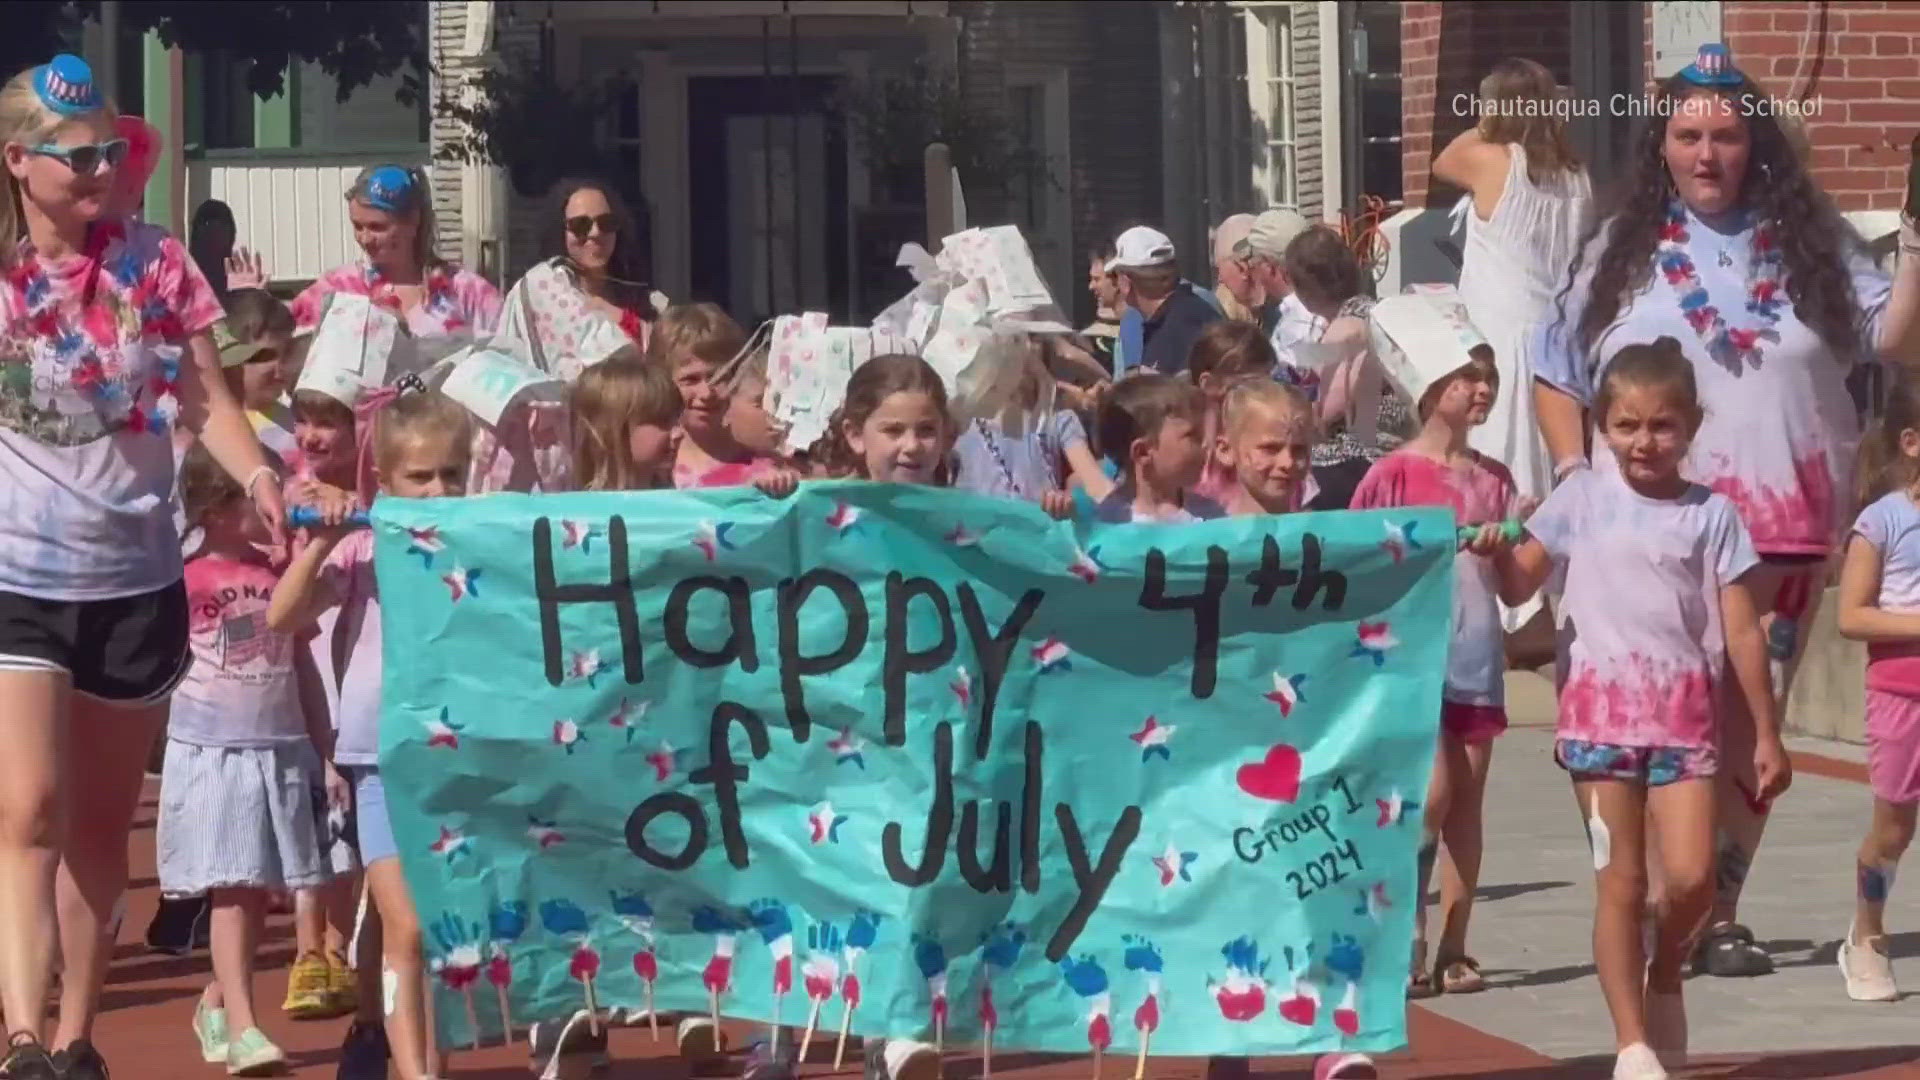 The Children's Parade at Chautauqua Institution is extra special this summer because the institution is celebrating its 150th anniversary.